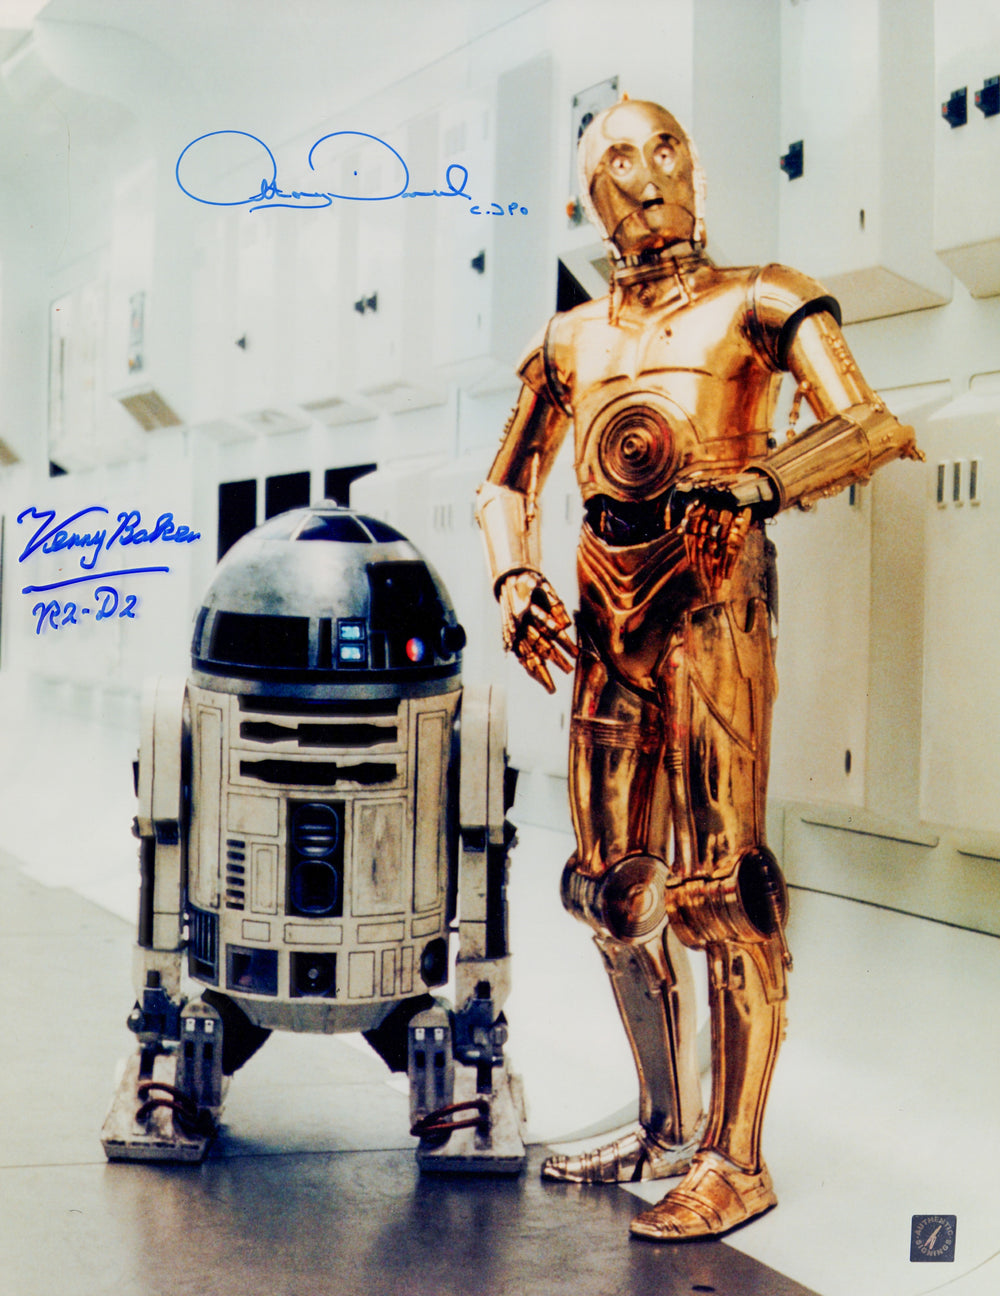 Anthony Daniels as C-3PO & Kenny Baker as R2-D2 in Star Wars: A New Hope Signed 16x20 Photo